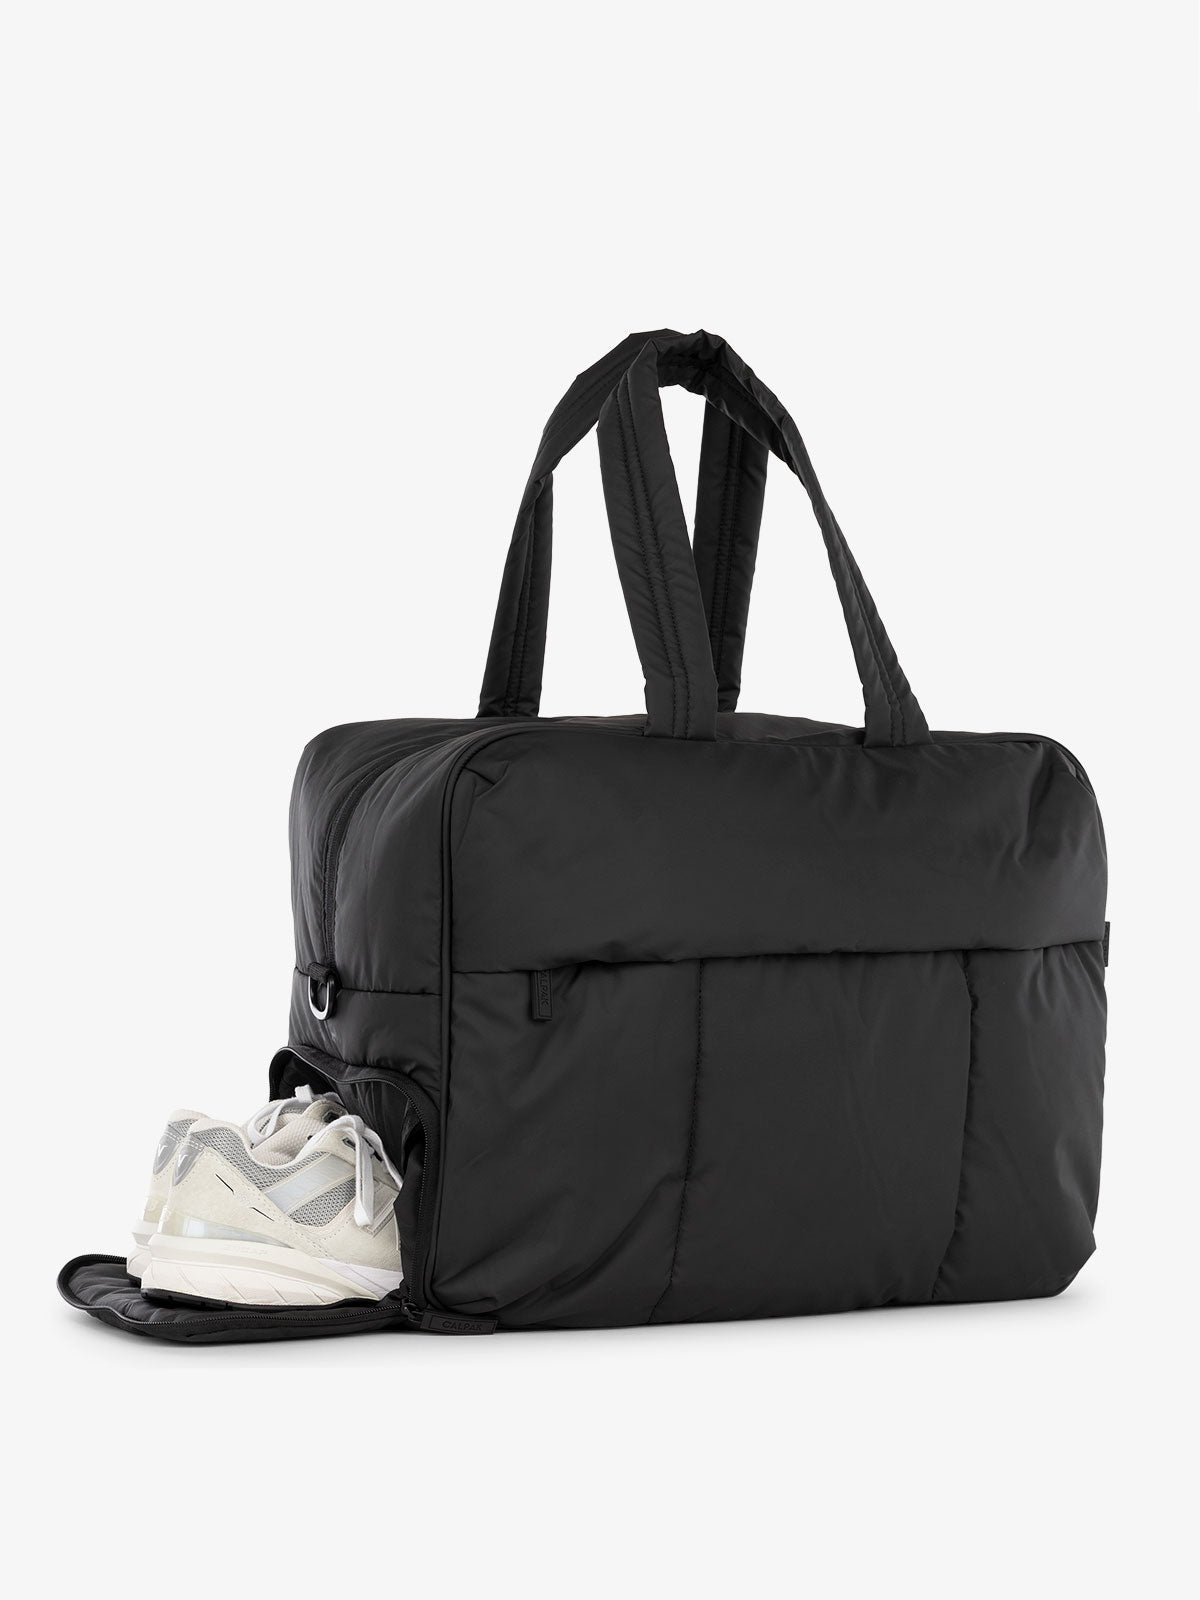 CALPAK Luka large duffel bag with side shoe compartment and dual handles in black